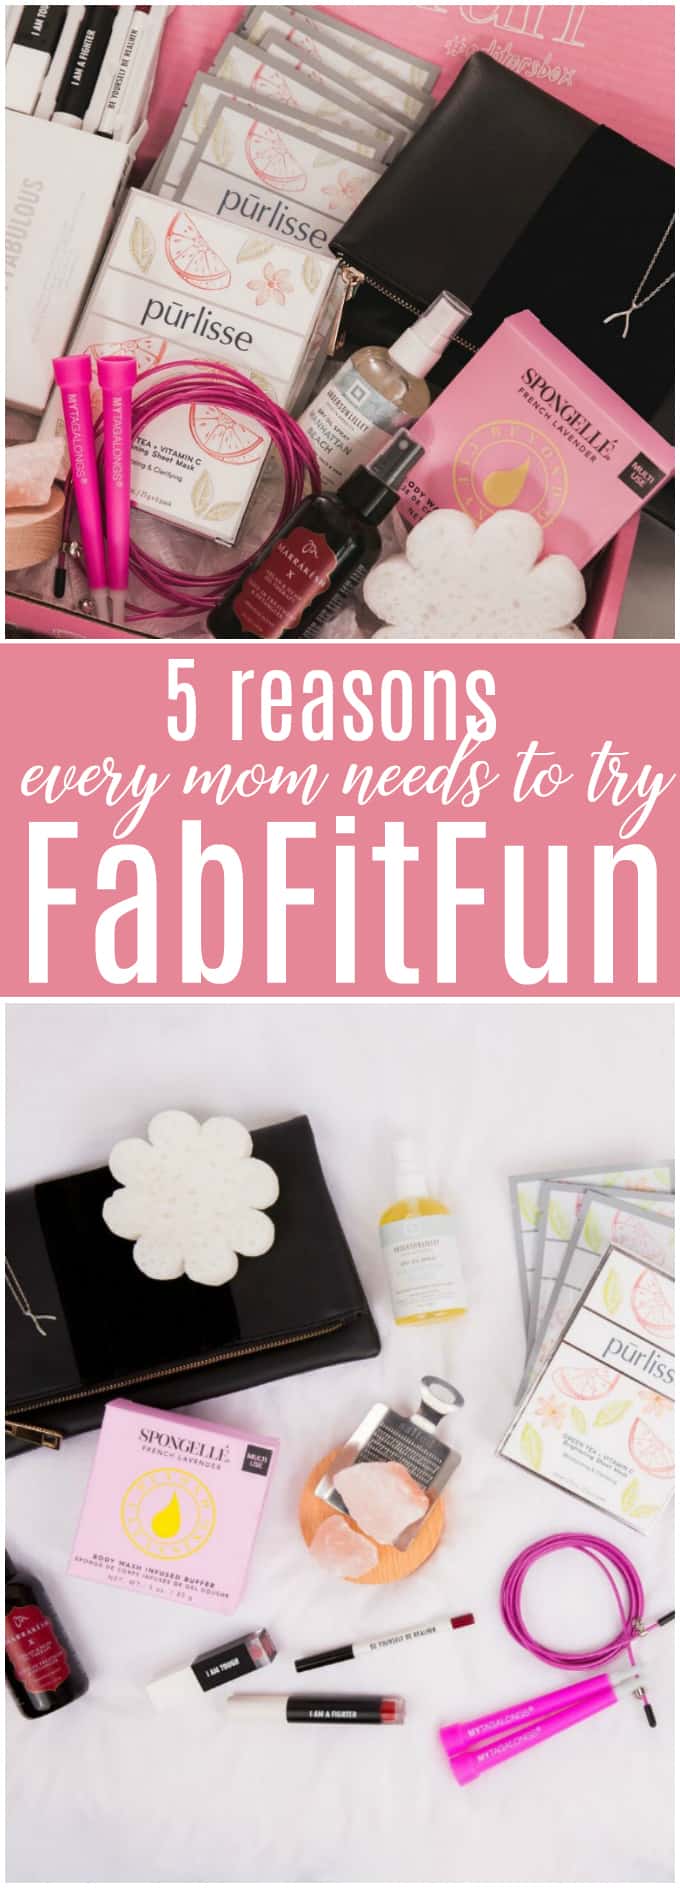 5 Reasons Every Mom Needs to Try FabFitFun - You'll love the affordability, convenience, and diversity of products.